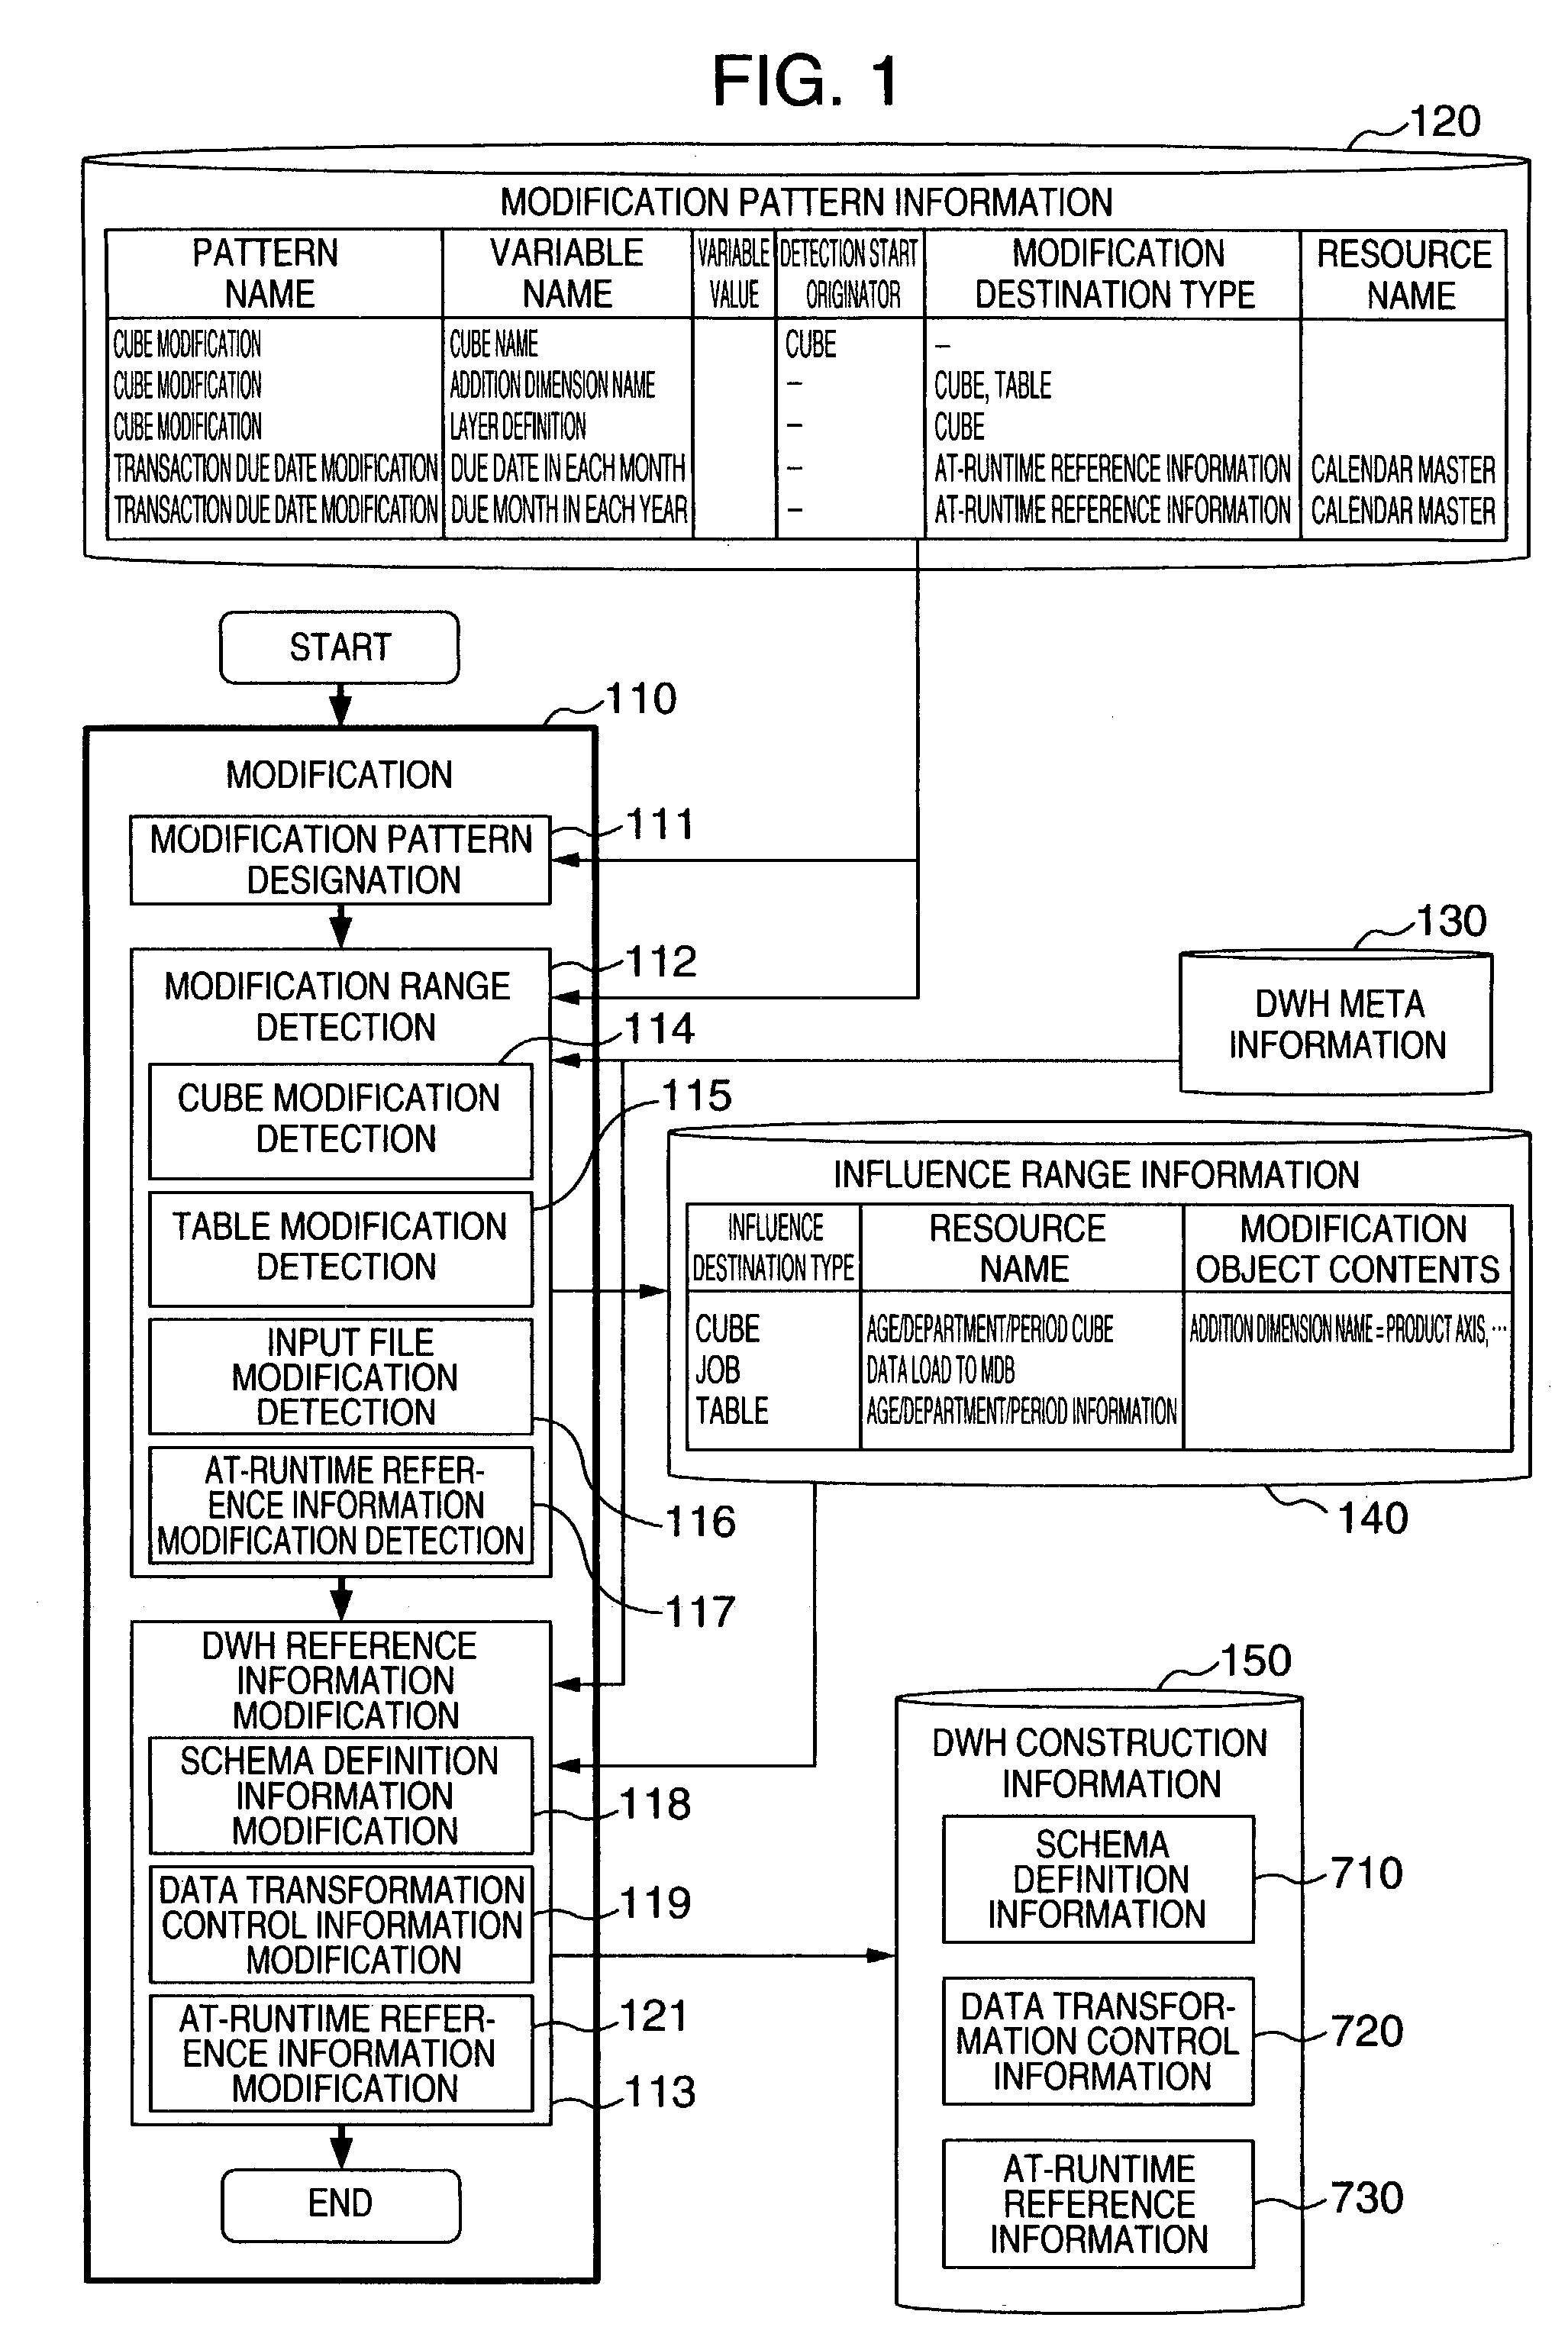 Method for changing database construction information